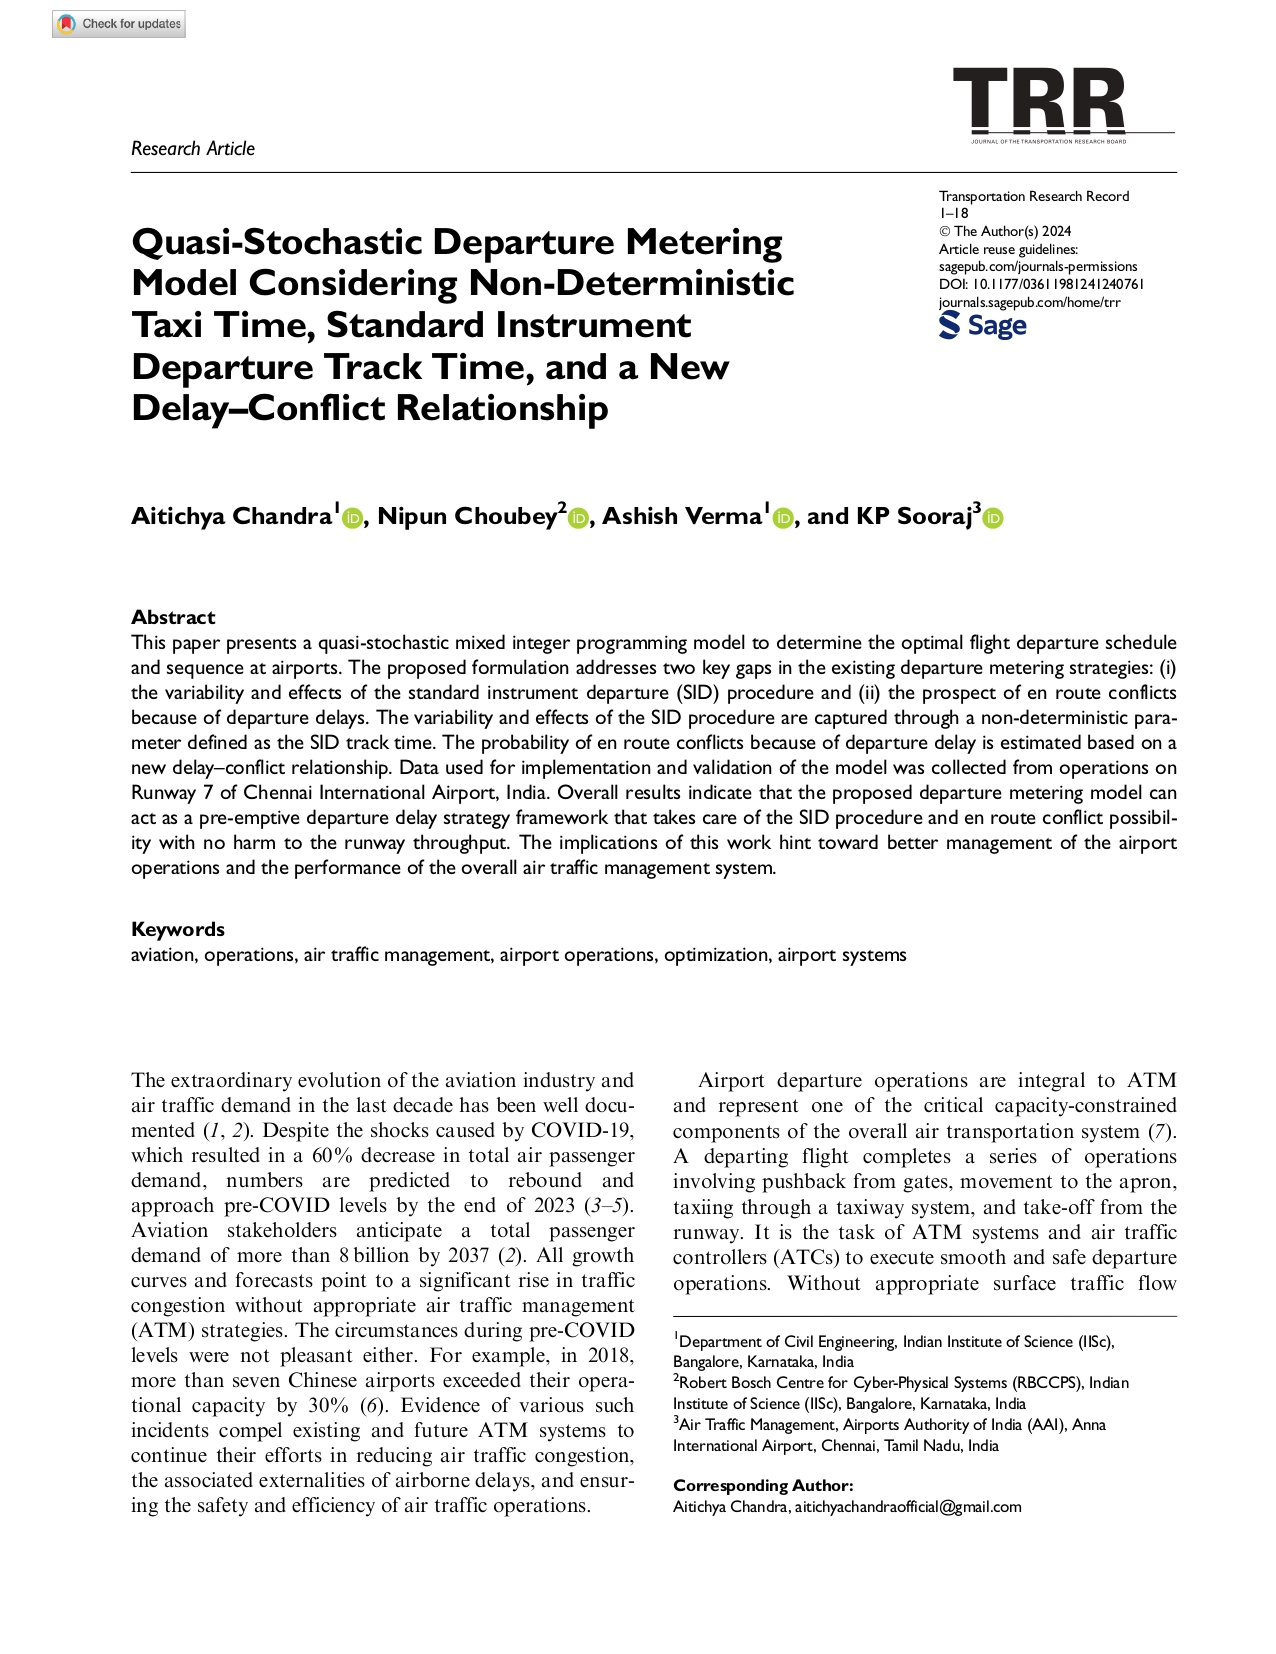 Quasi-Stochastic Departure Metering Model Considering Non-Deterministic Taxi Time, Standard Instrument Departure Track Time, and a New Delay–Conflict Relationship